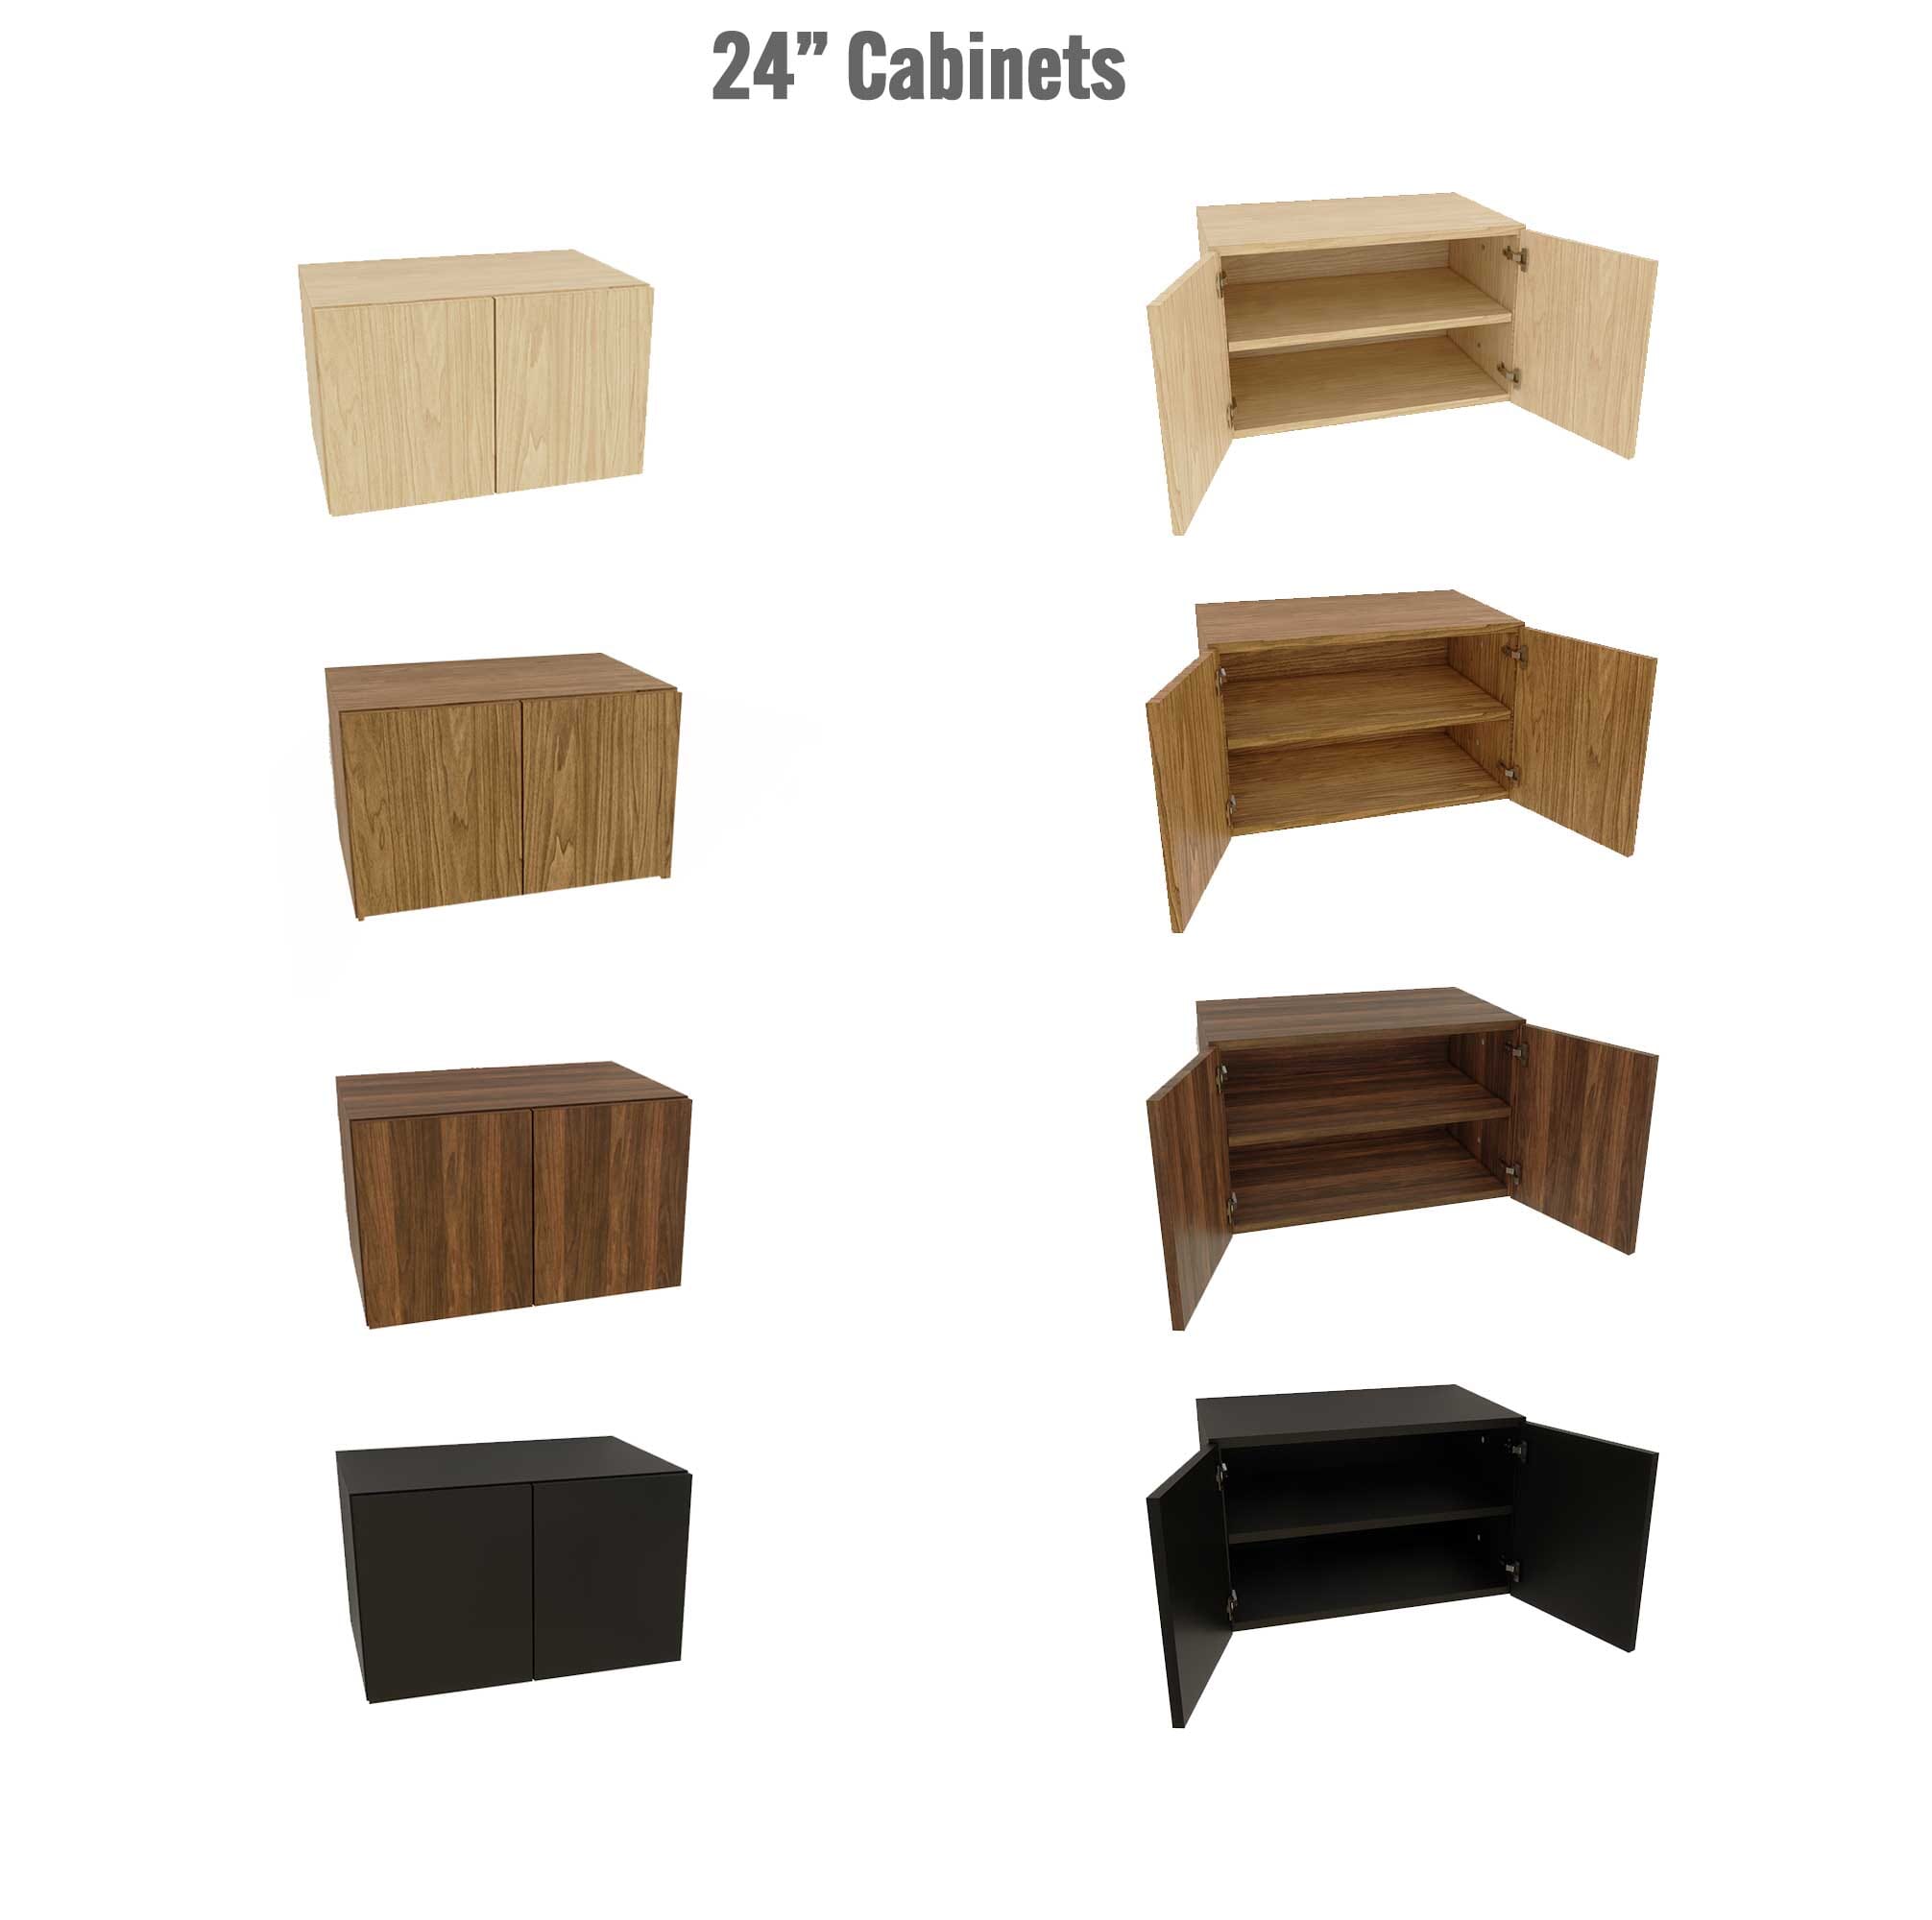 ModShelf Floor to Ceiling Room Divider Shelving with Cabinets